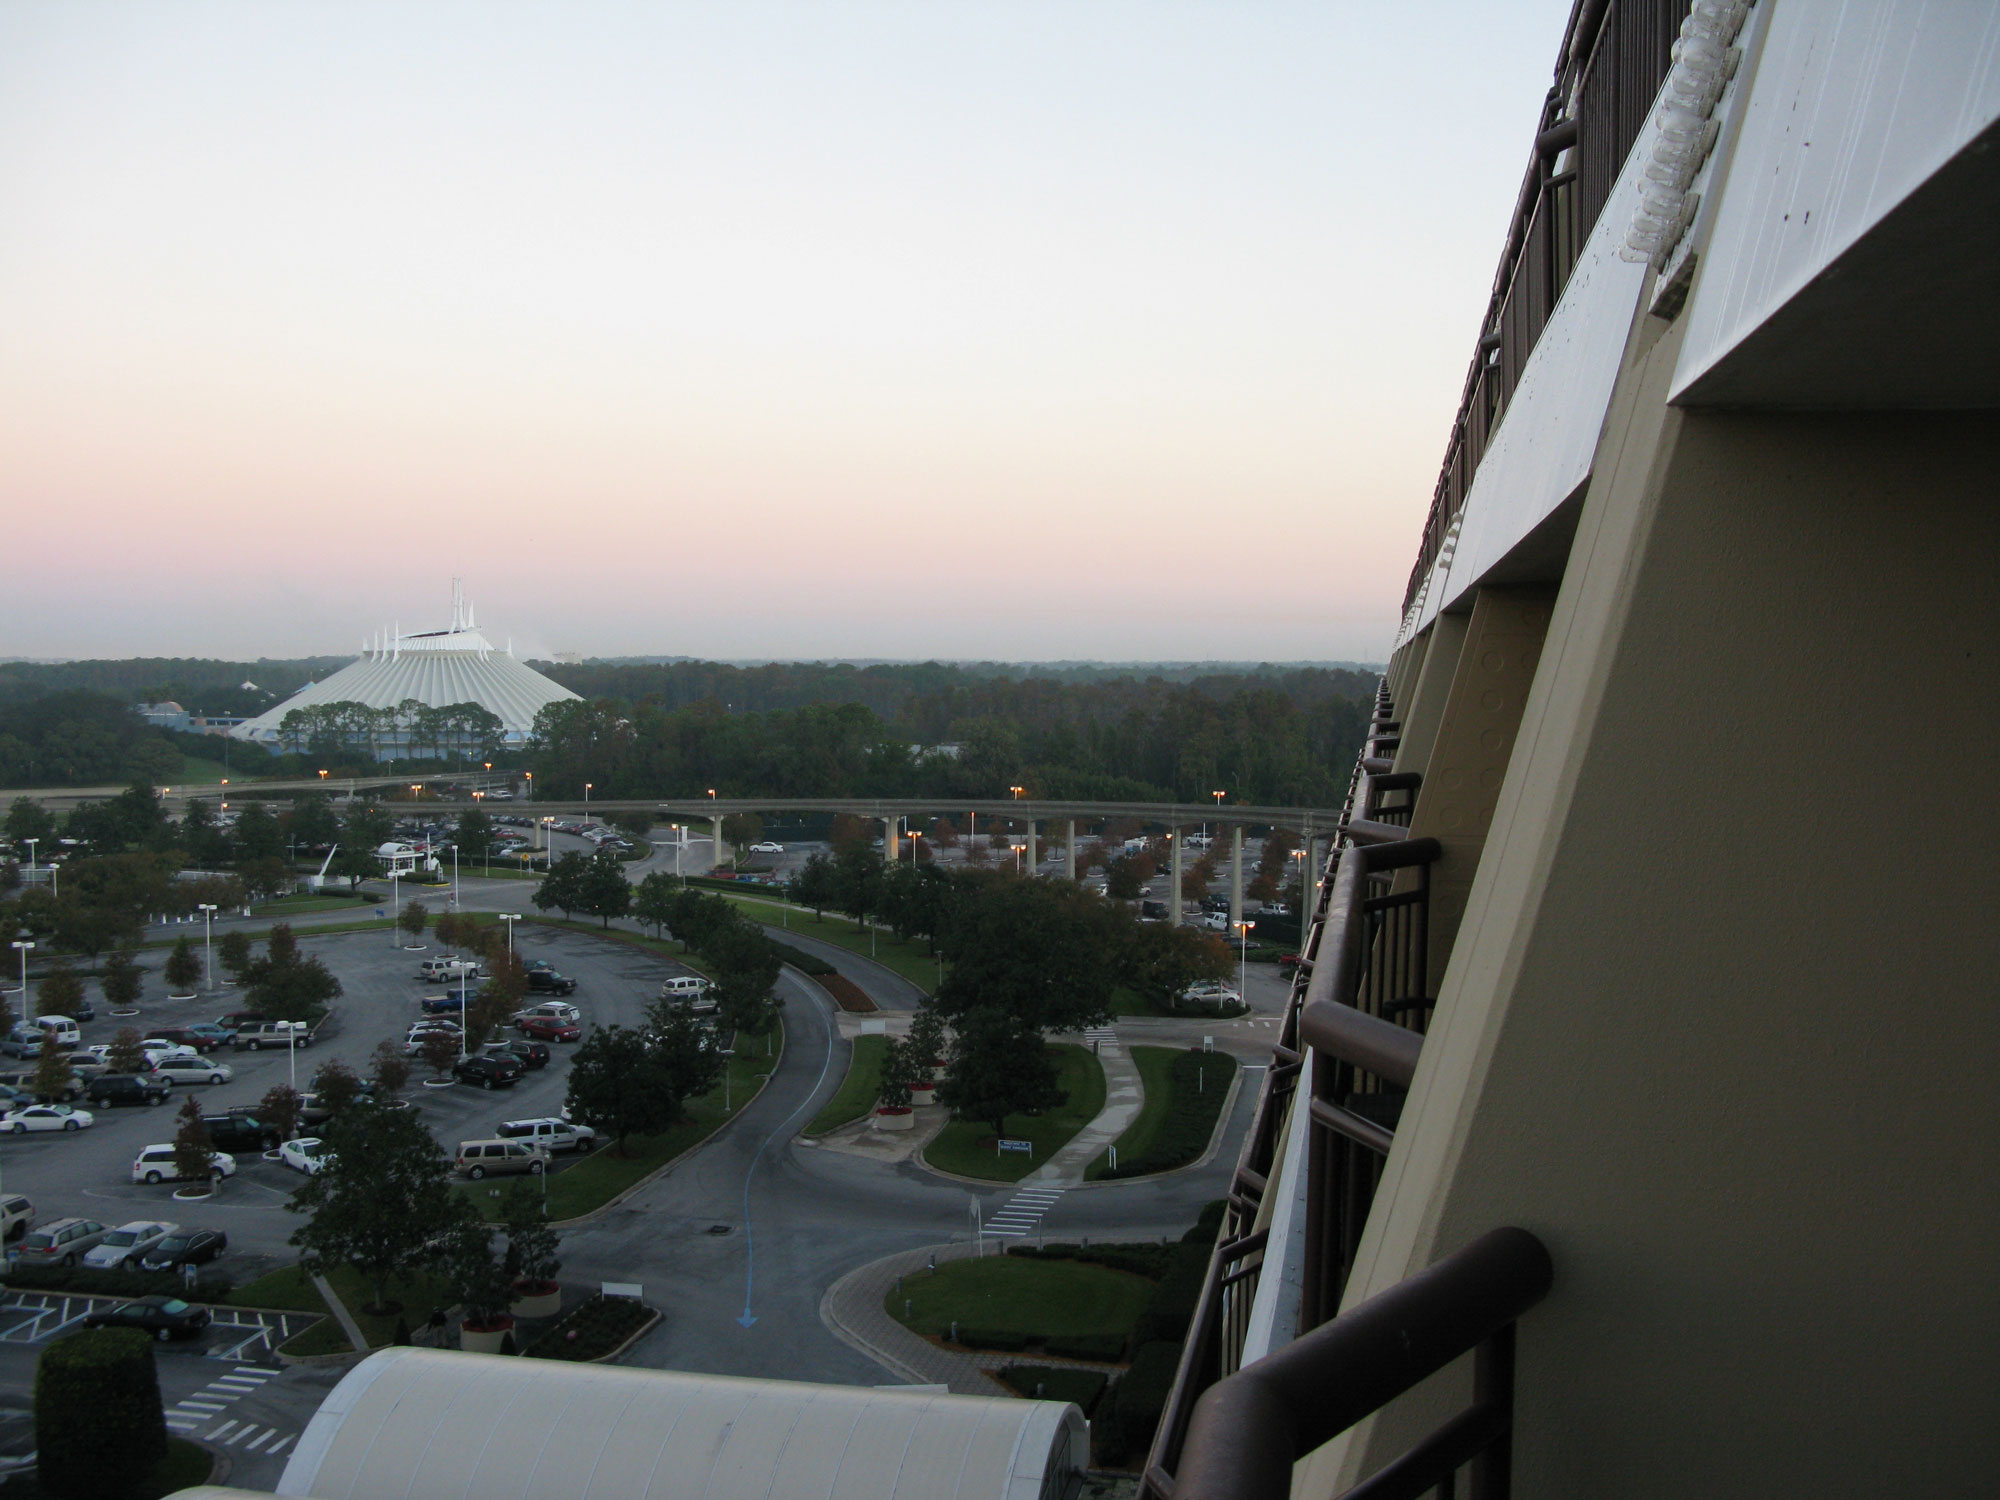 Contemporary Resort - Balcony view at sunset